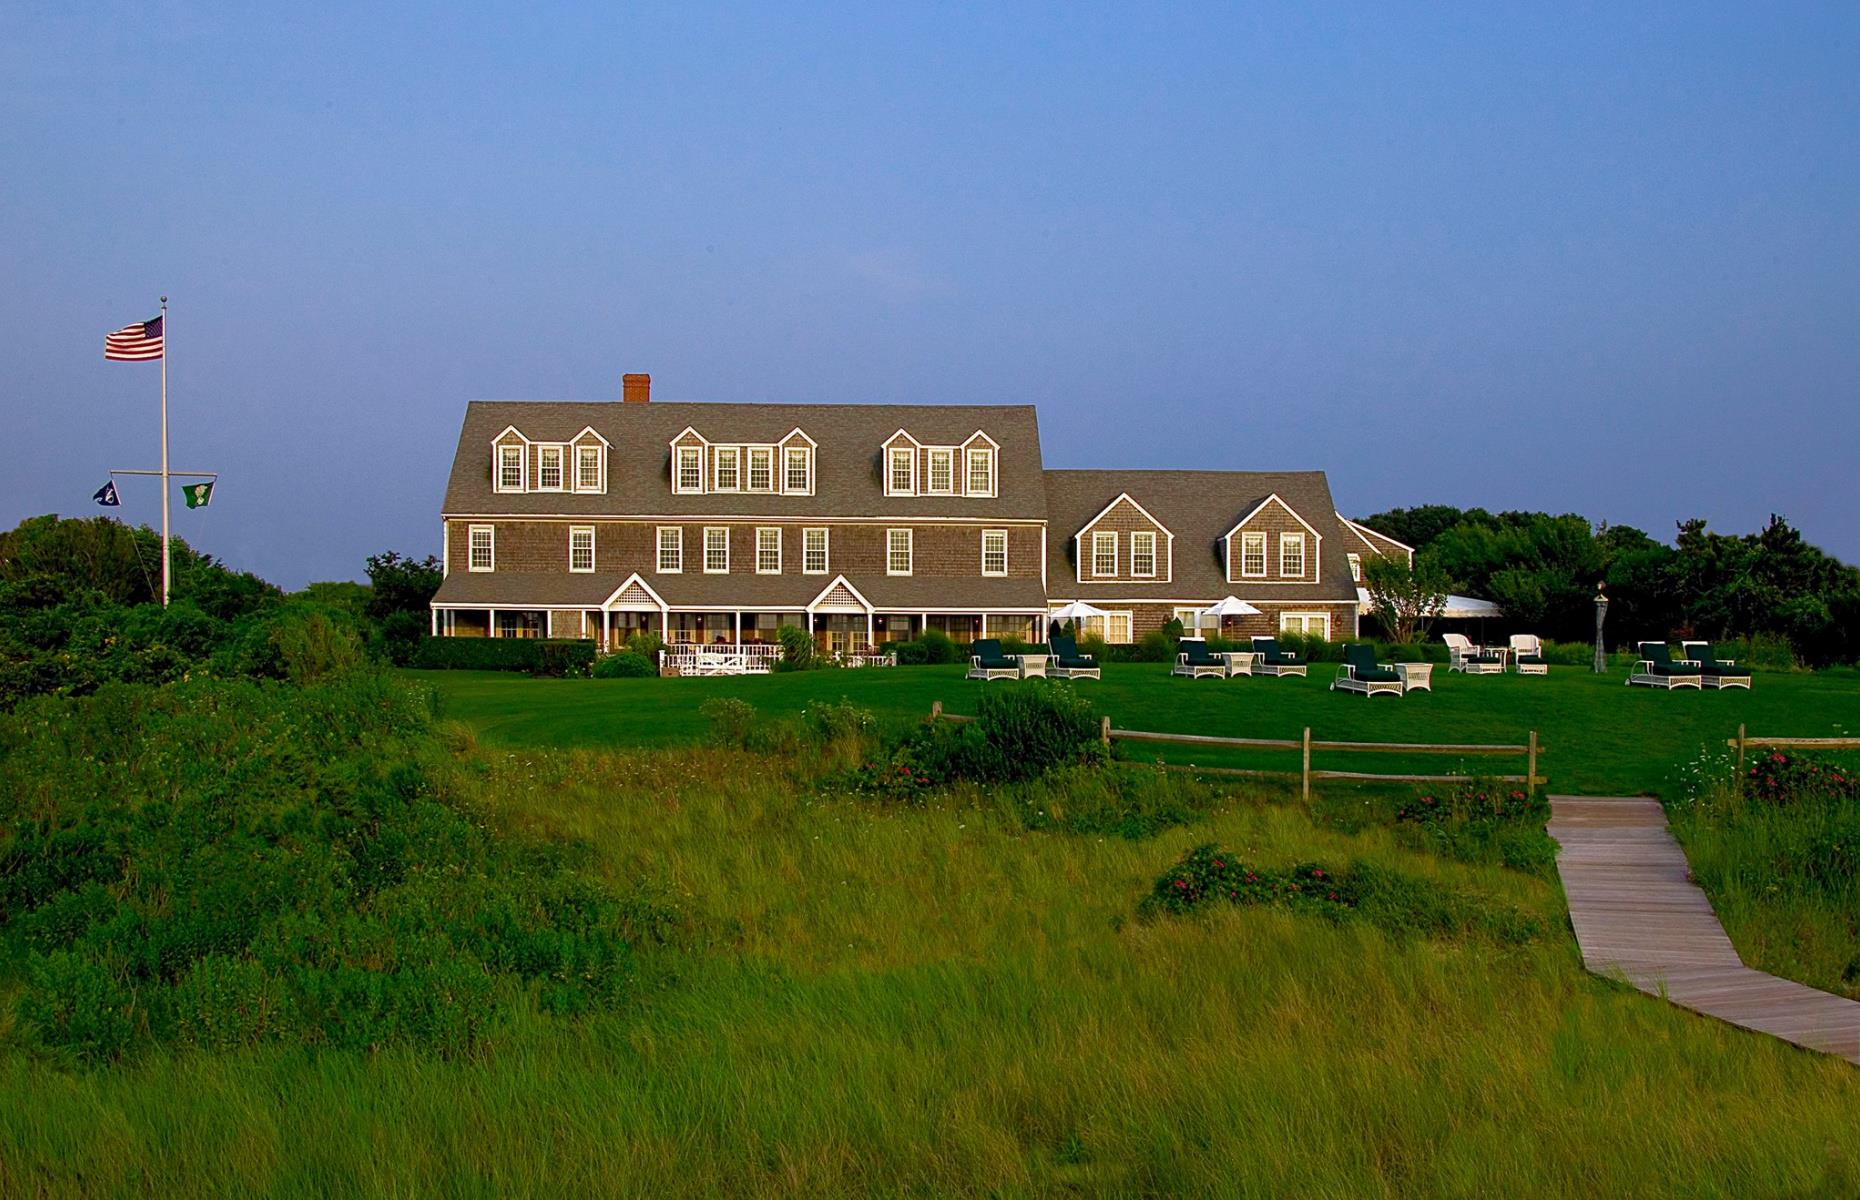 <p>The charm and beauty of Nantucket Island is best experienced at a classic New England waterfront hotel like <a href="https://www.wauwinet.com">The Wauwinet</a>. The spacious rooms in calming shades of white and pale blue get guests in the mood for a serene getaway. There are plenty of ways to while away the day here – a walk on the private beaches, a cycle using complimentary bikes or watersports in summer. For a true treat, visitors can rent out Anchorage House, a quaint Nantucket guesthouse managed by The Wauwinet.</p>